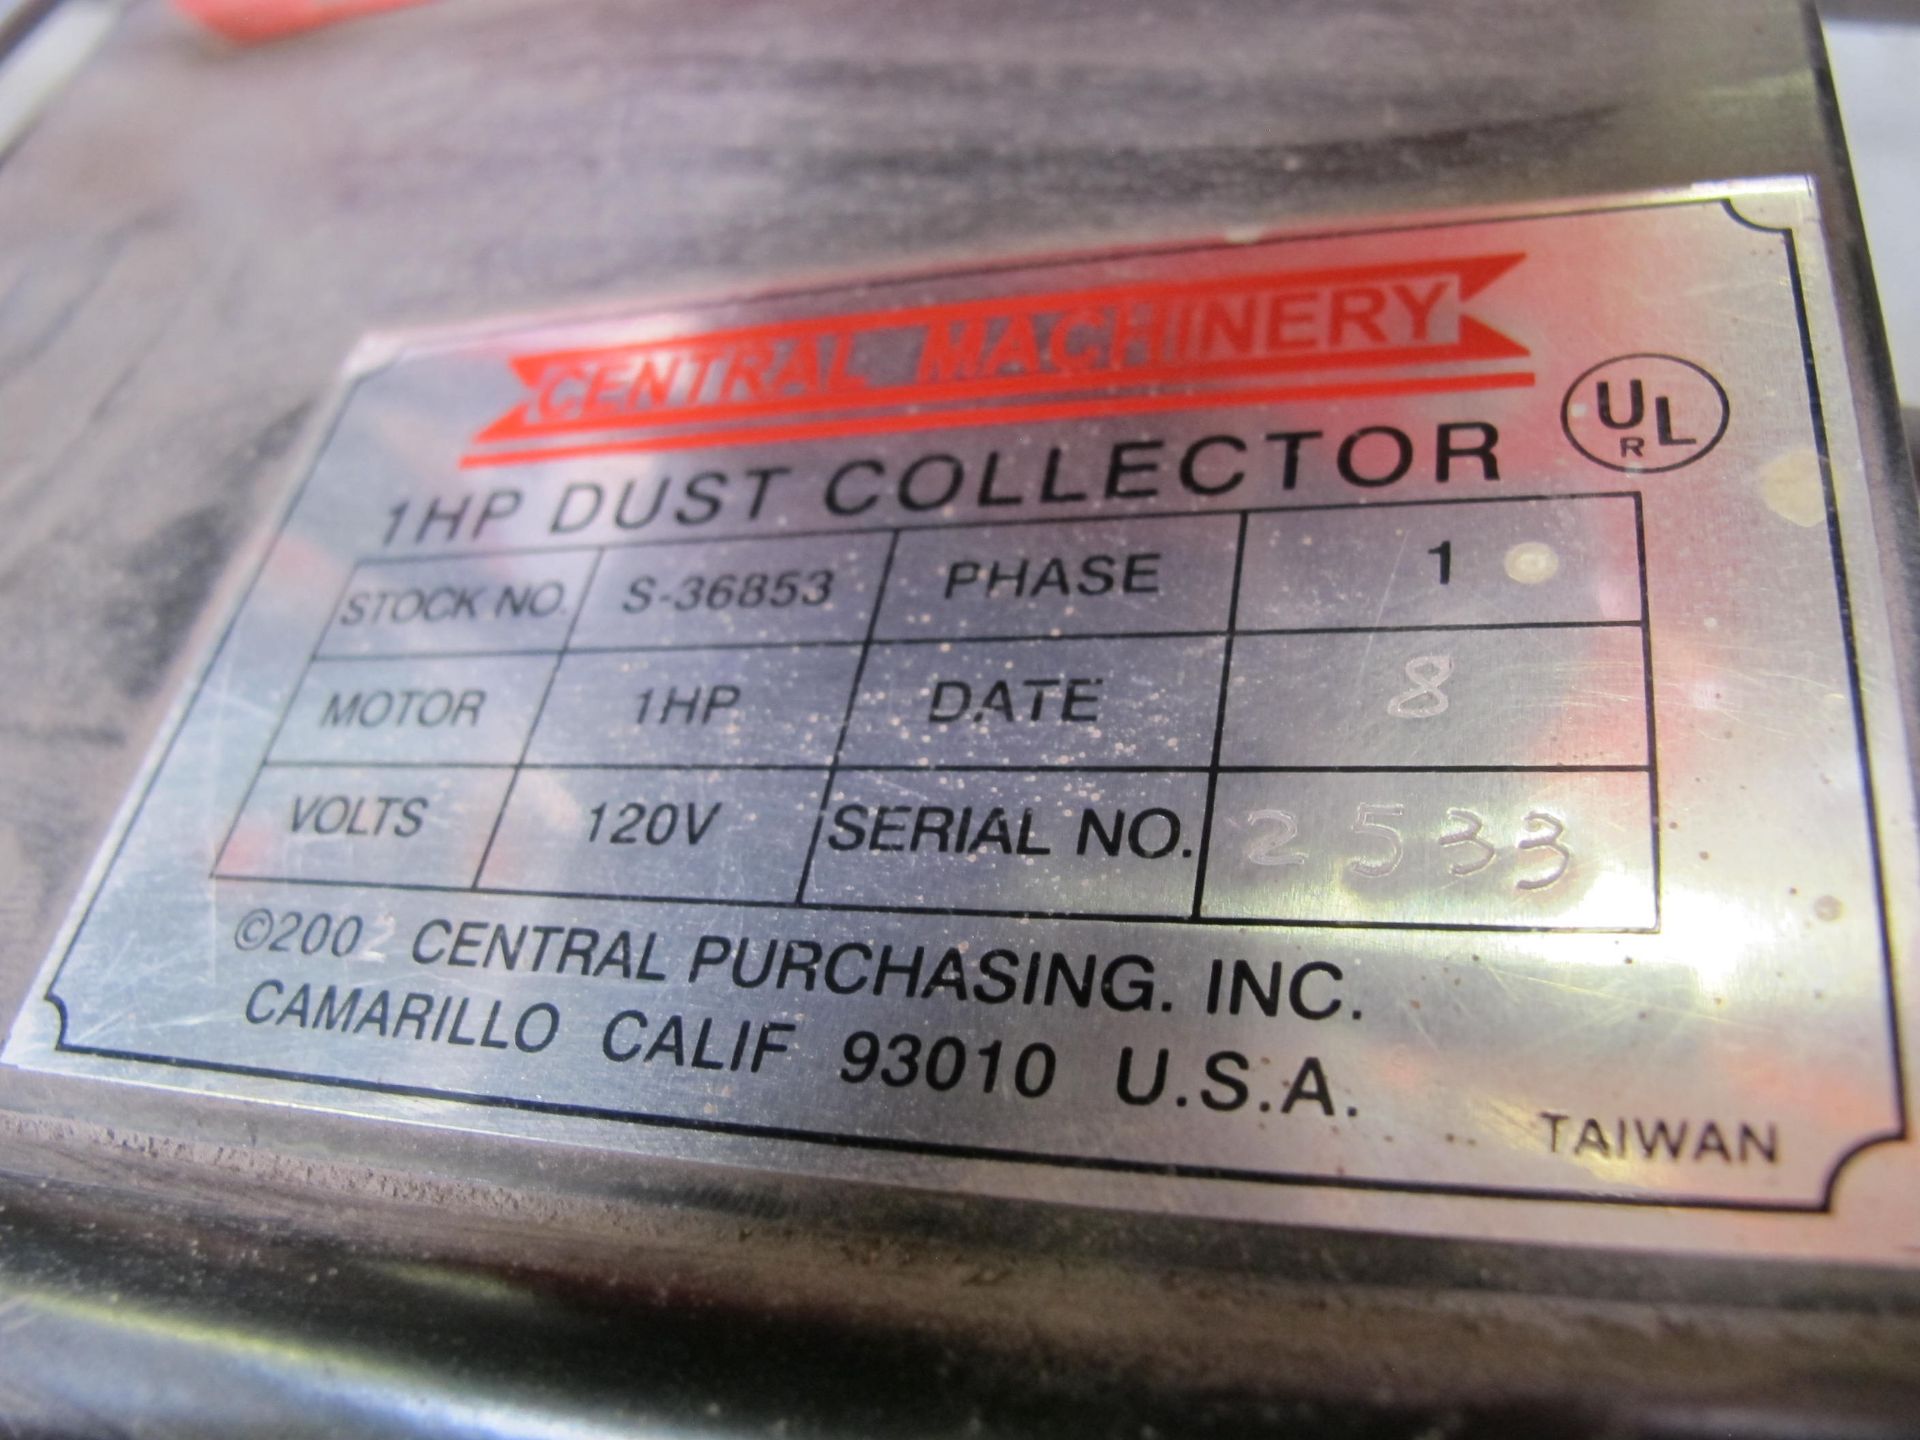 CENTRAL MACHINERY DUST COLLECTOR, MODEL NUMBER S-36853, 1 HP, 1 PHASE, 120 V. LOADING & HANDLING $5 - Image 2 of 2